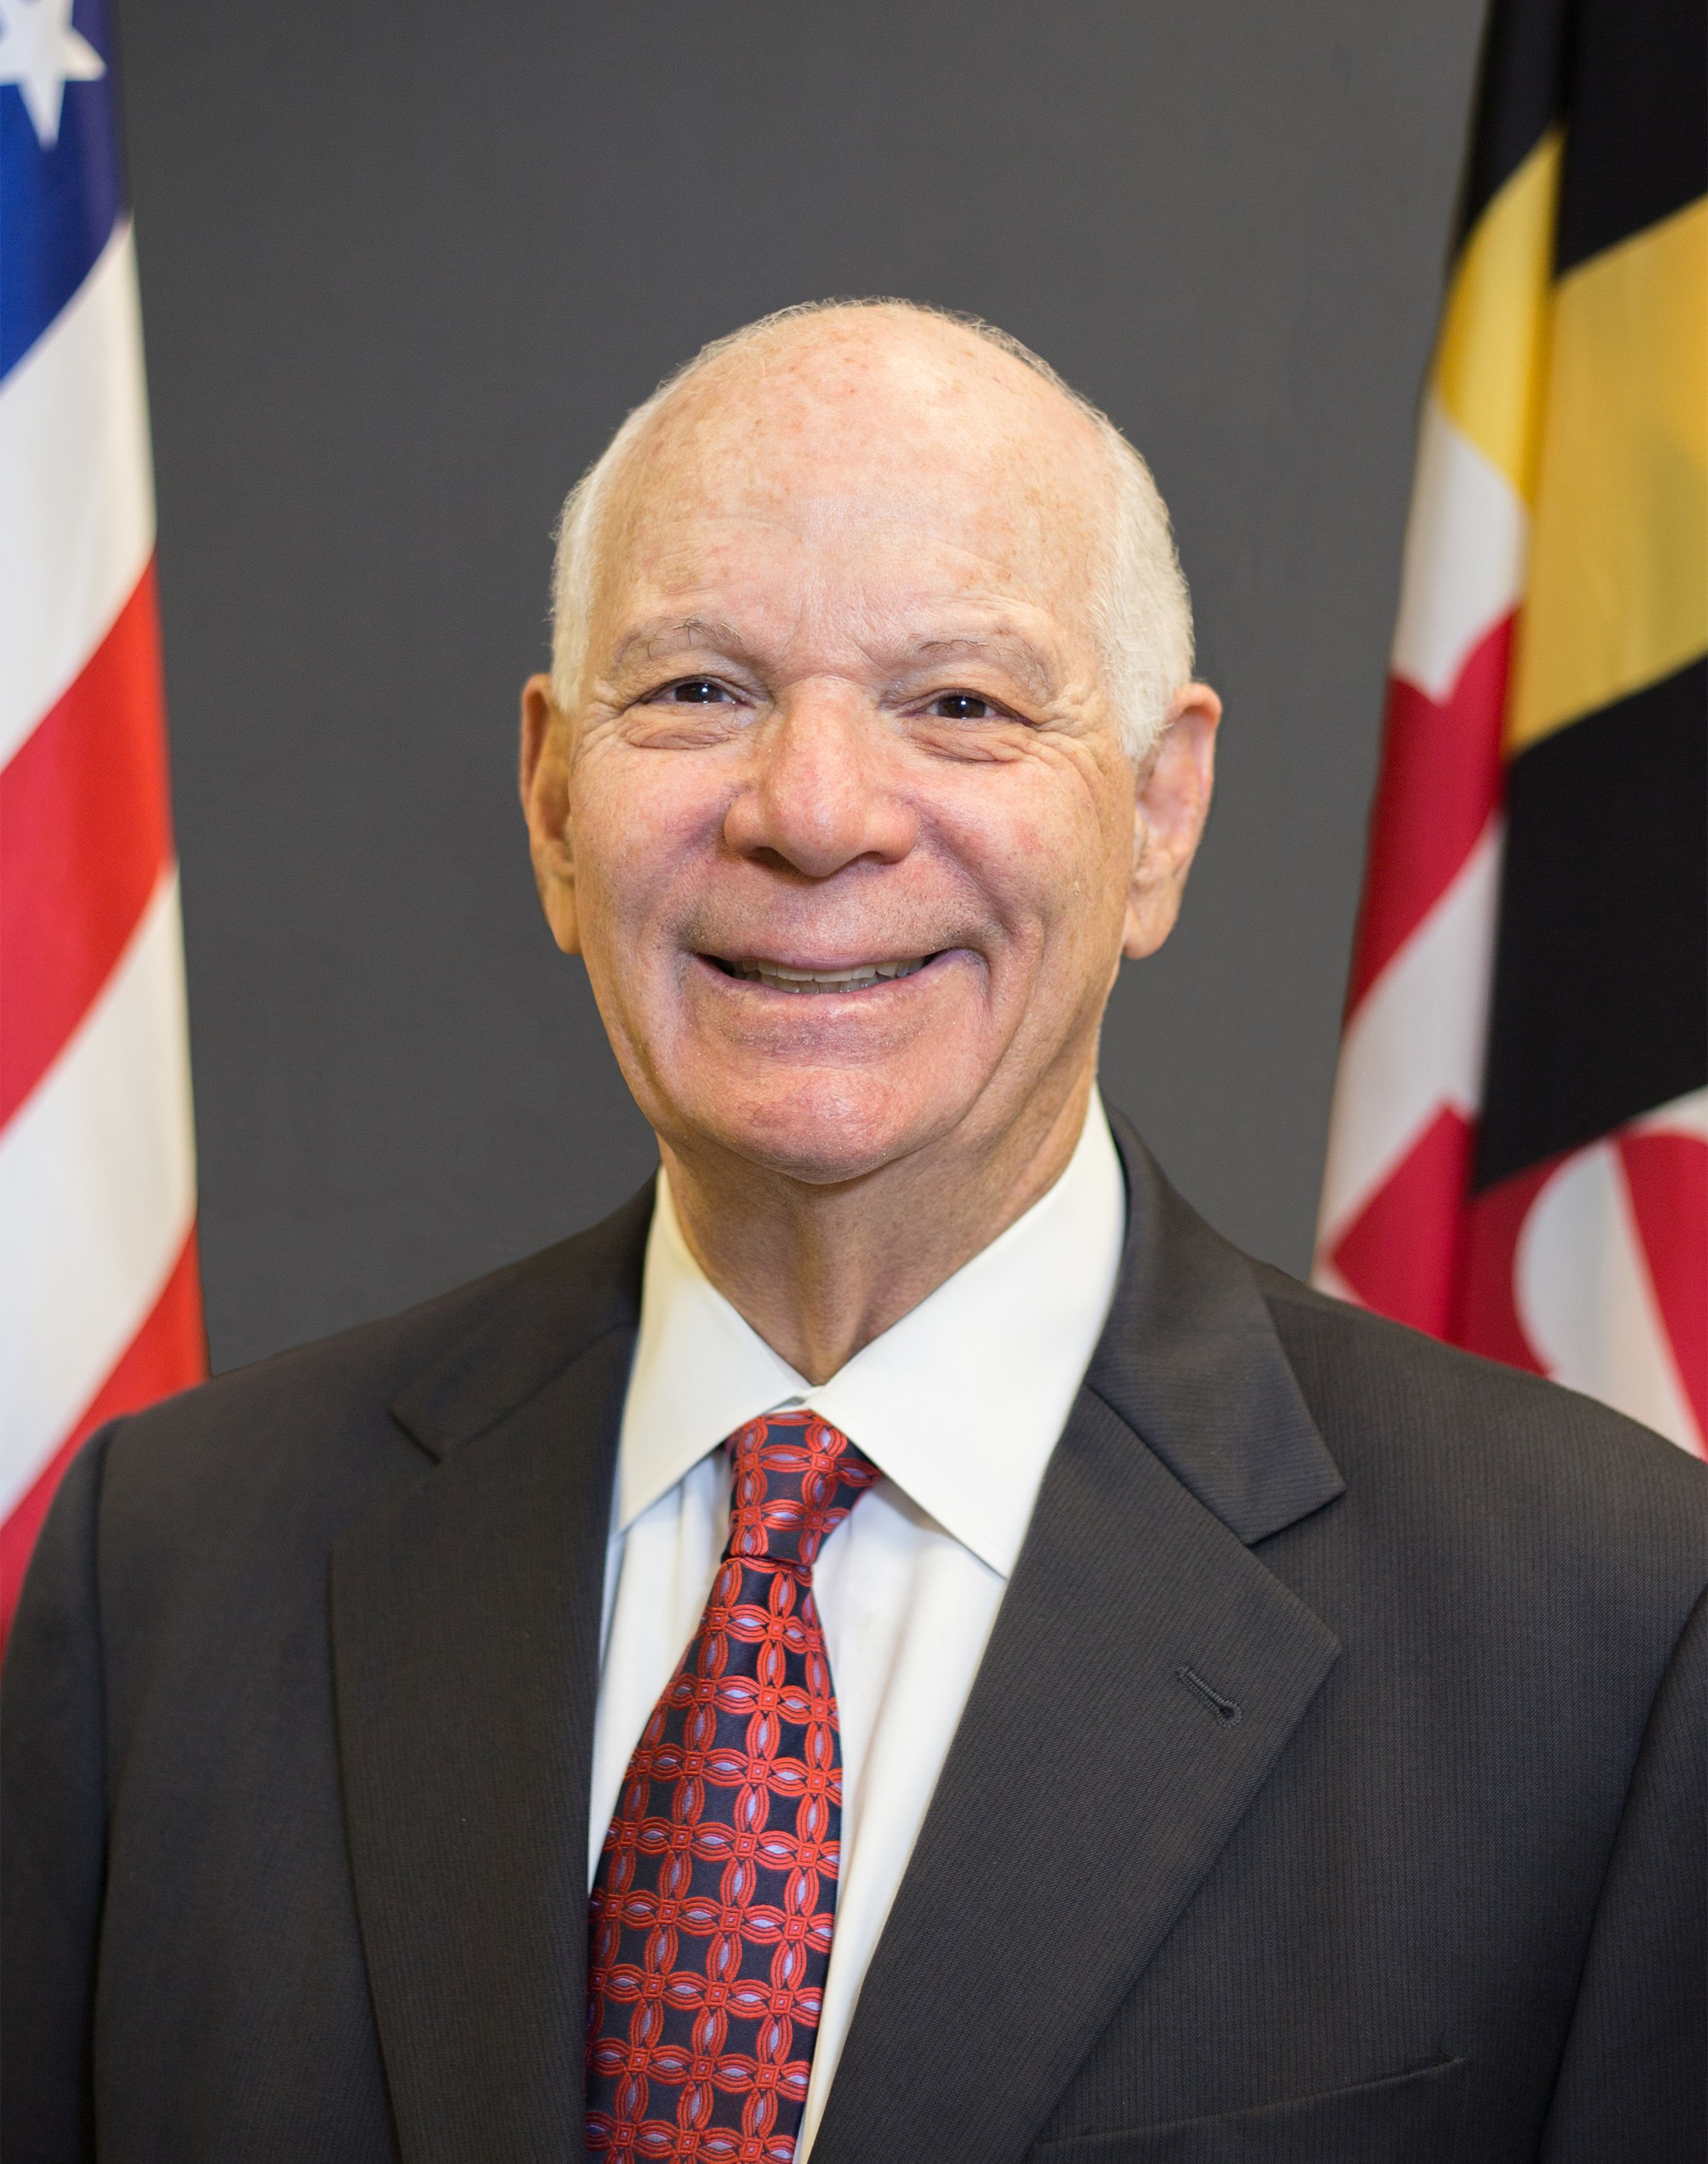 Sen. Ben Cardin: Reflections on Congress, and a career of service